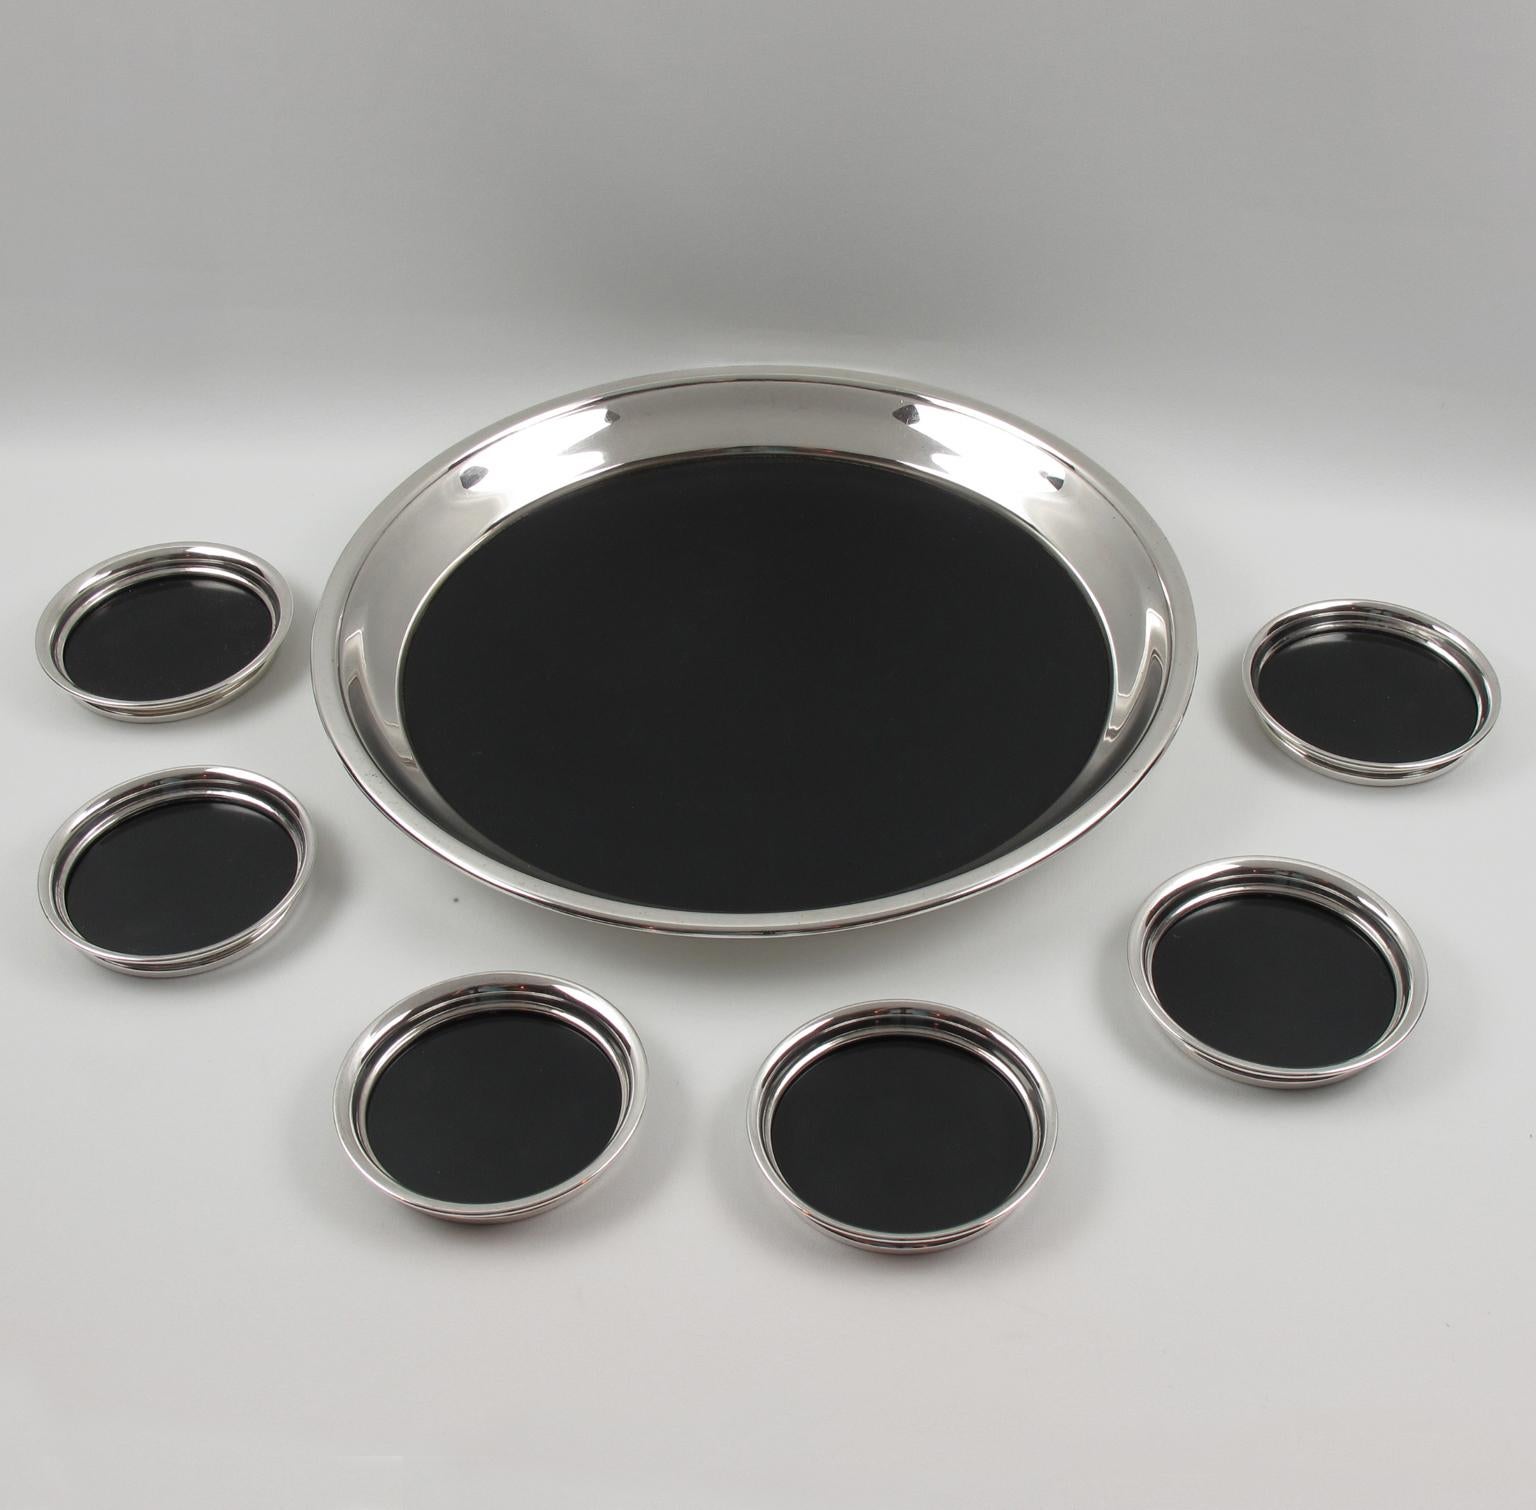 Elegant modernist barware set, comprising a rounded serving or bar tray and six coasters, manufactured by F.B. Rogers Silver Co. Black bakelite bottom insert for each piece that sits inside a polished silver plate metal surround. The exterior of the